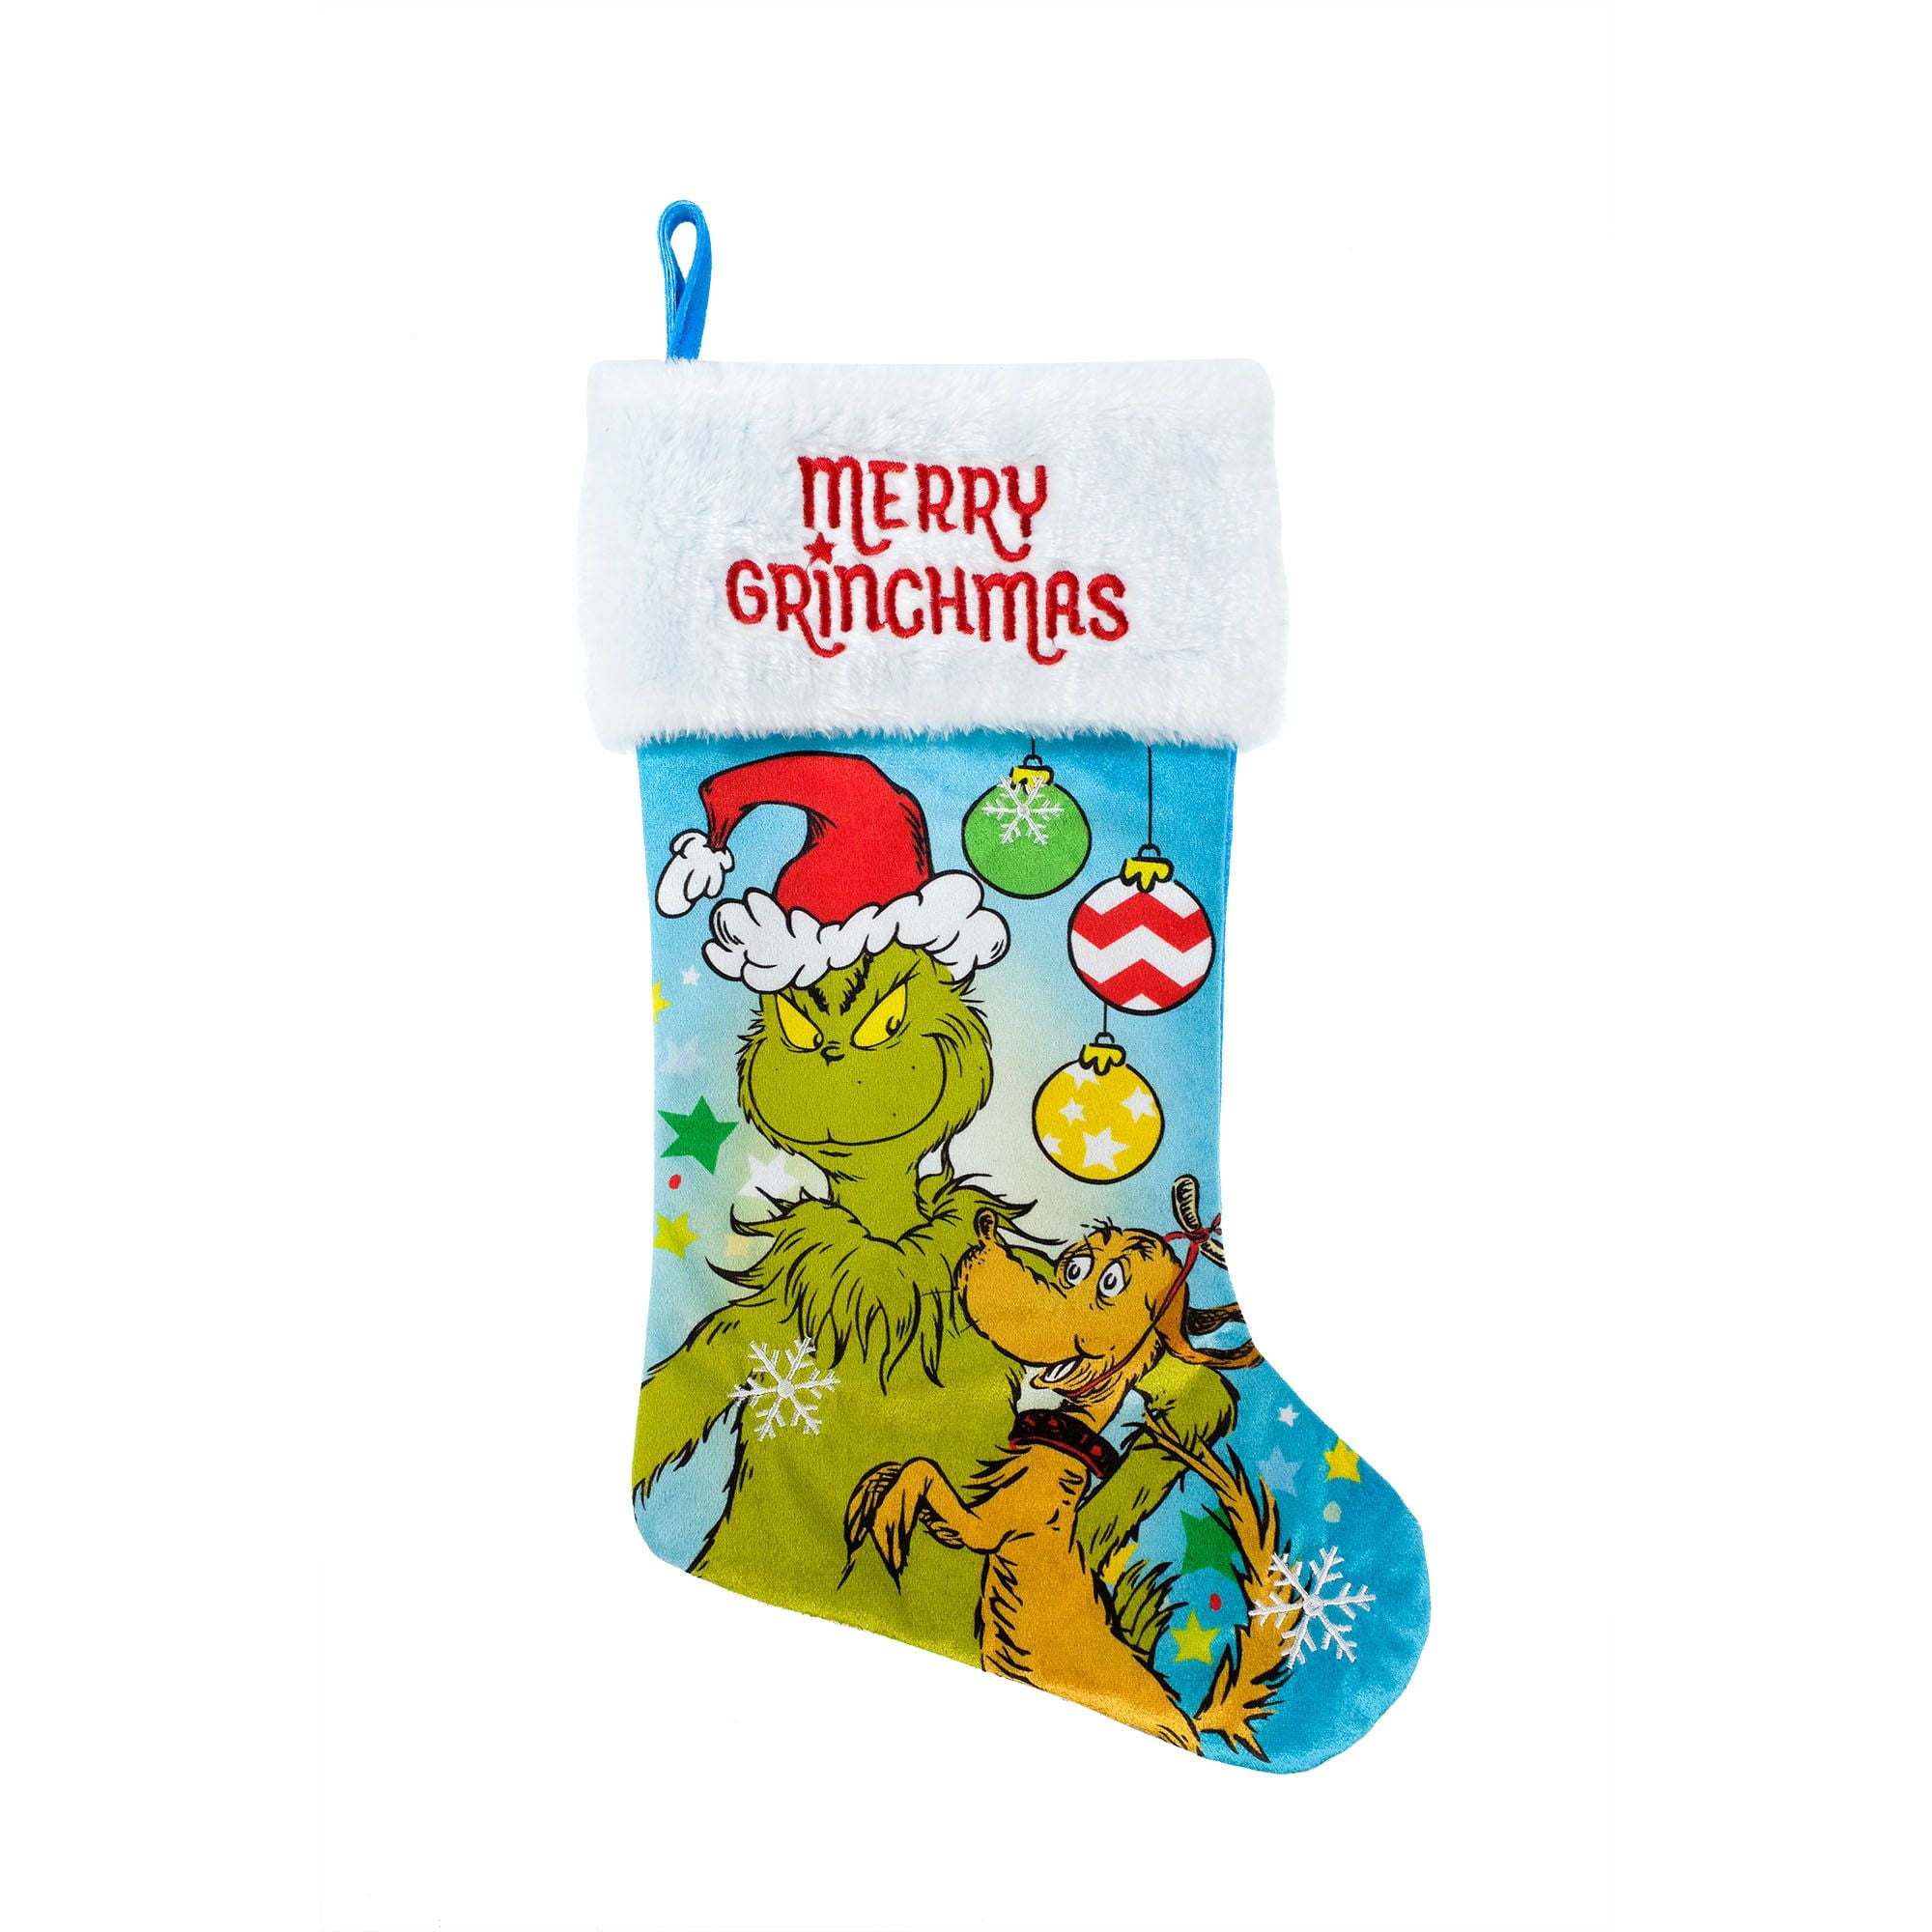 ** GRINCH AND MAX  ** CHRISTMAS STOCKING   DR SEUSS   NEW!!